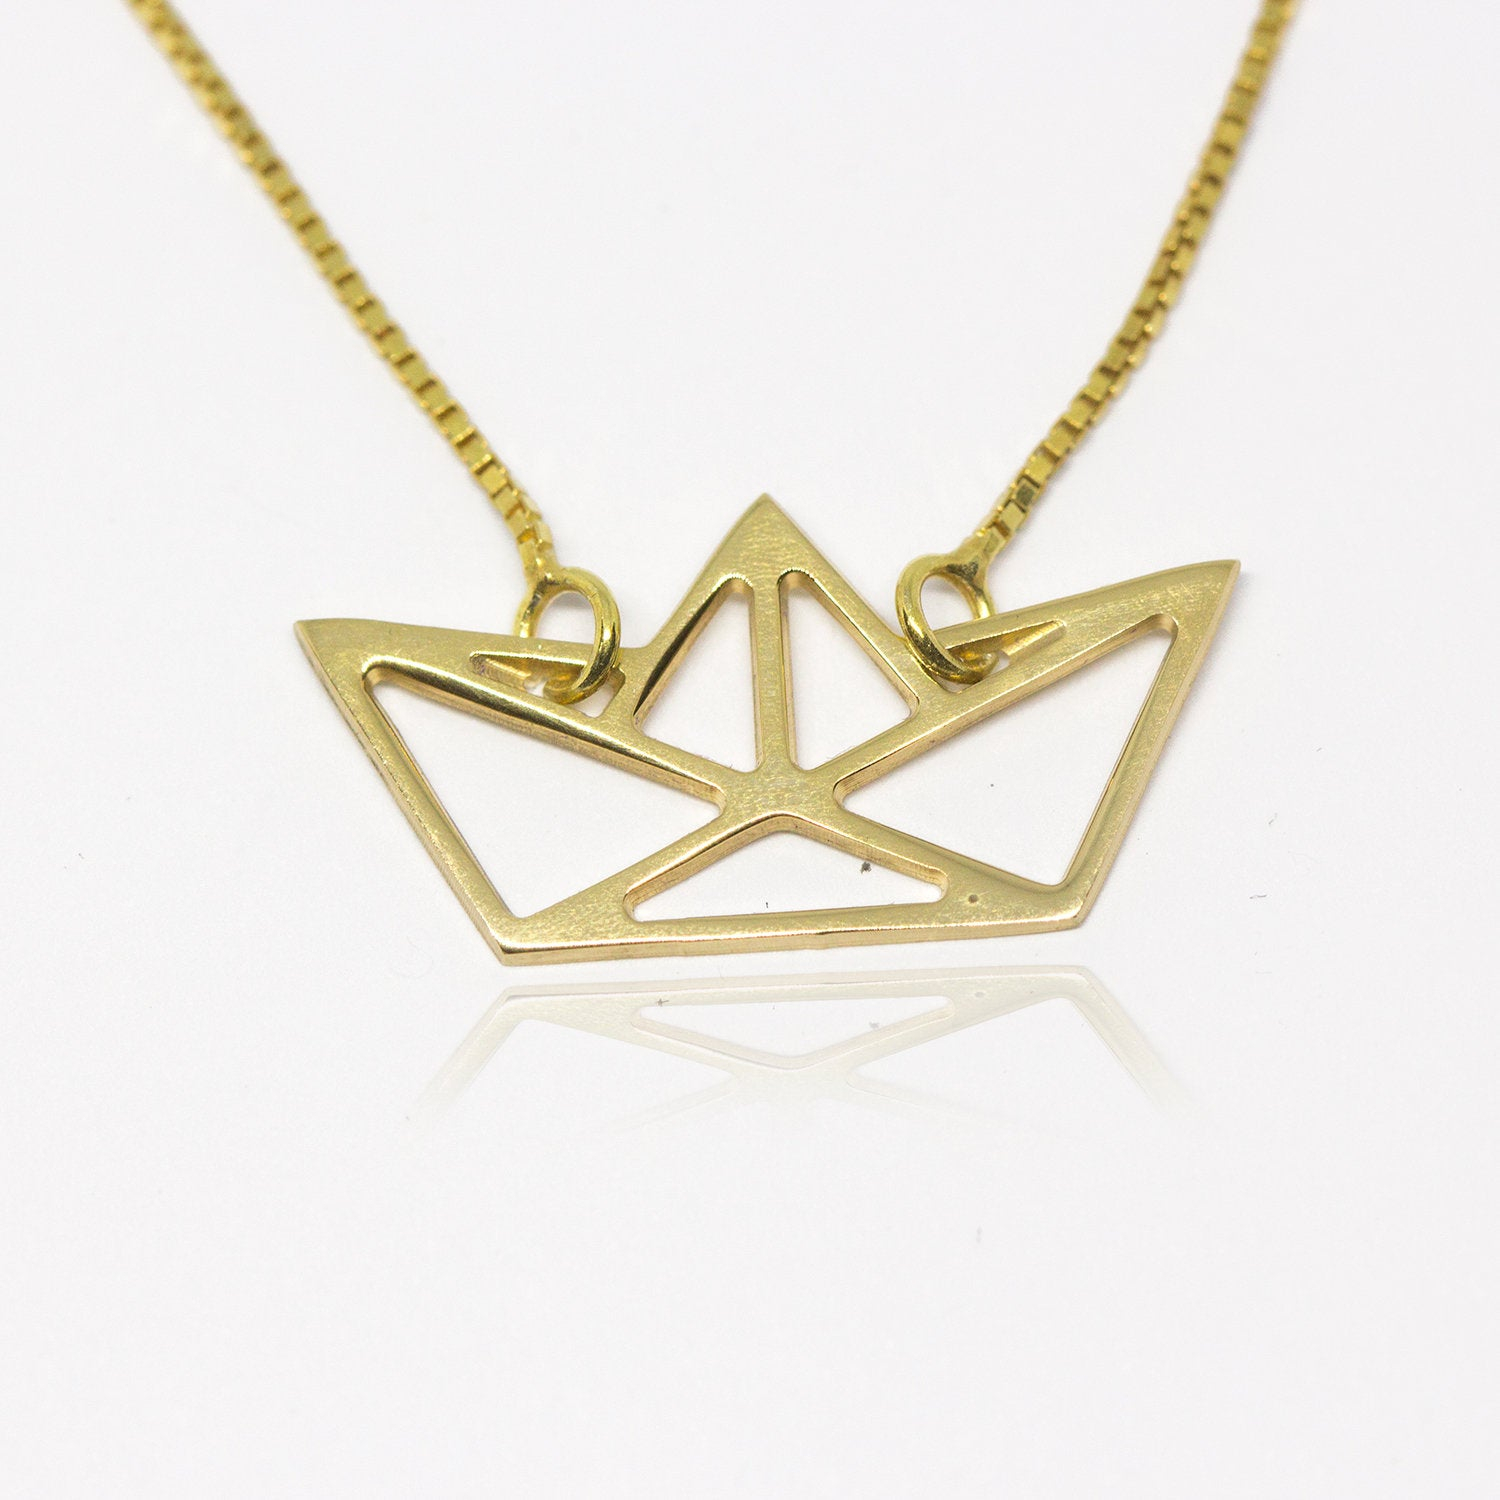 Origami Sailor Hat 14k Gold Origami Boathat Necklace Perfect Gift For Sailors Boat Lovers Necklace Ship Charm Boatshiphat Pendant